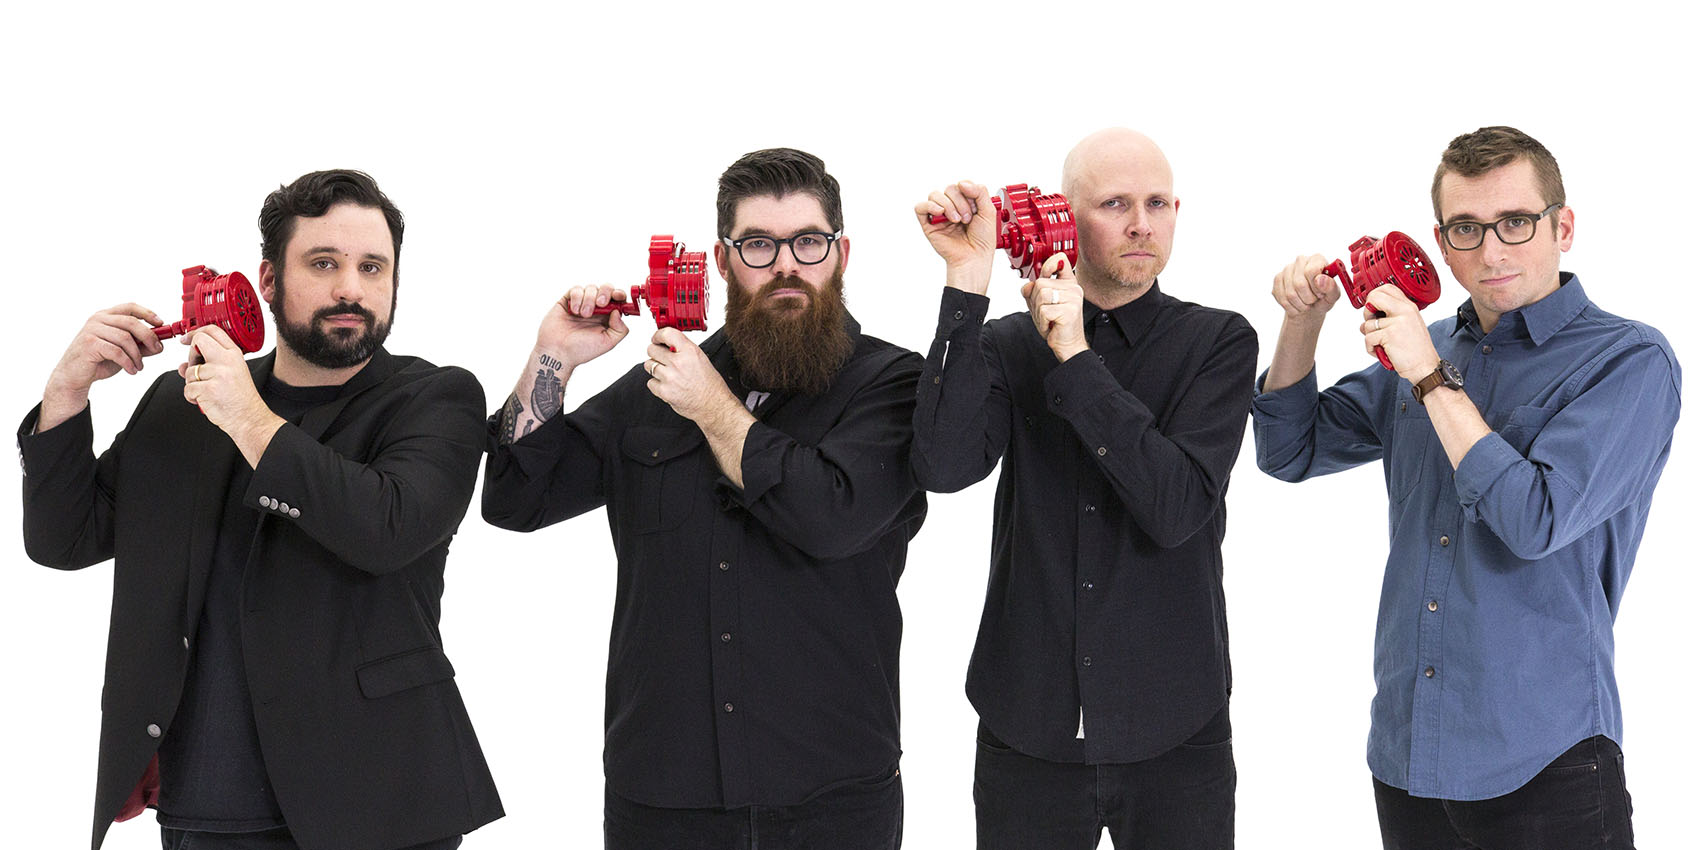 Four men holding red hand-held noisemakers in front of a white background.